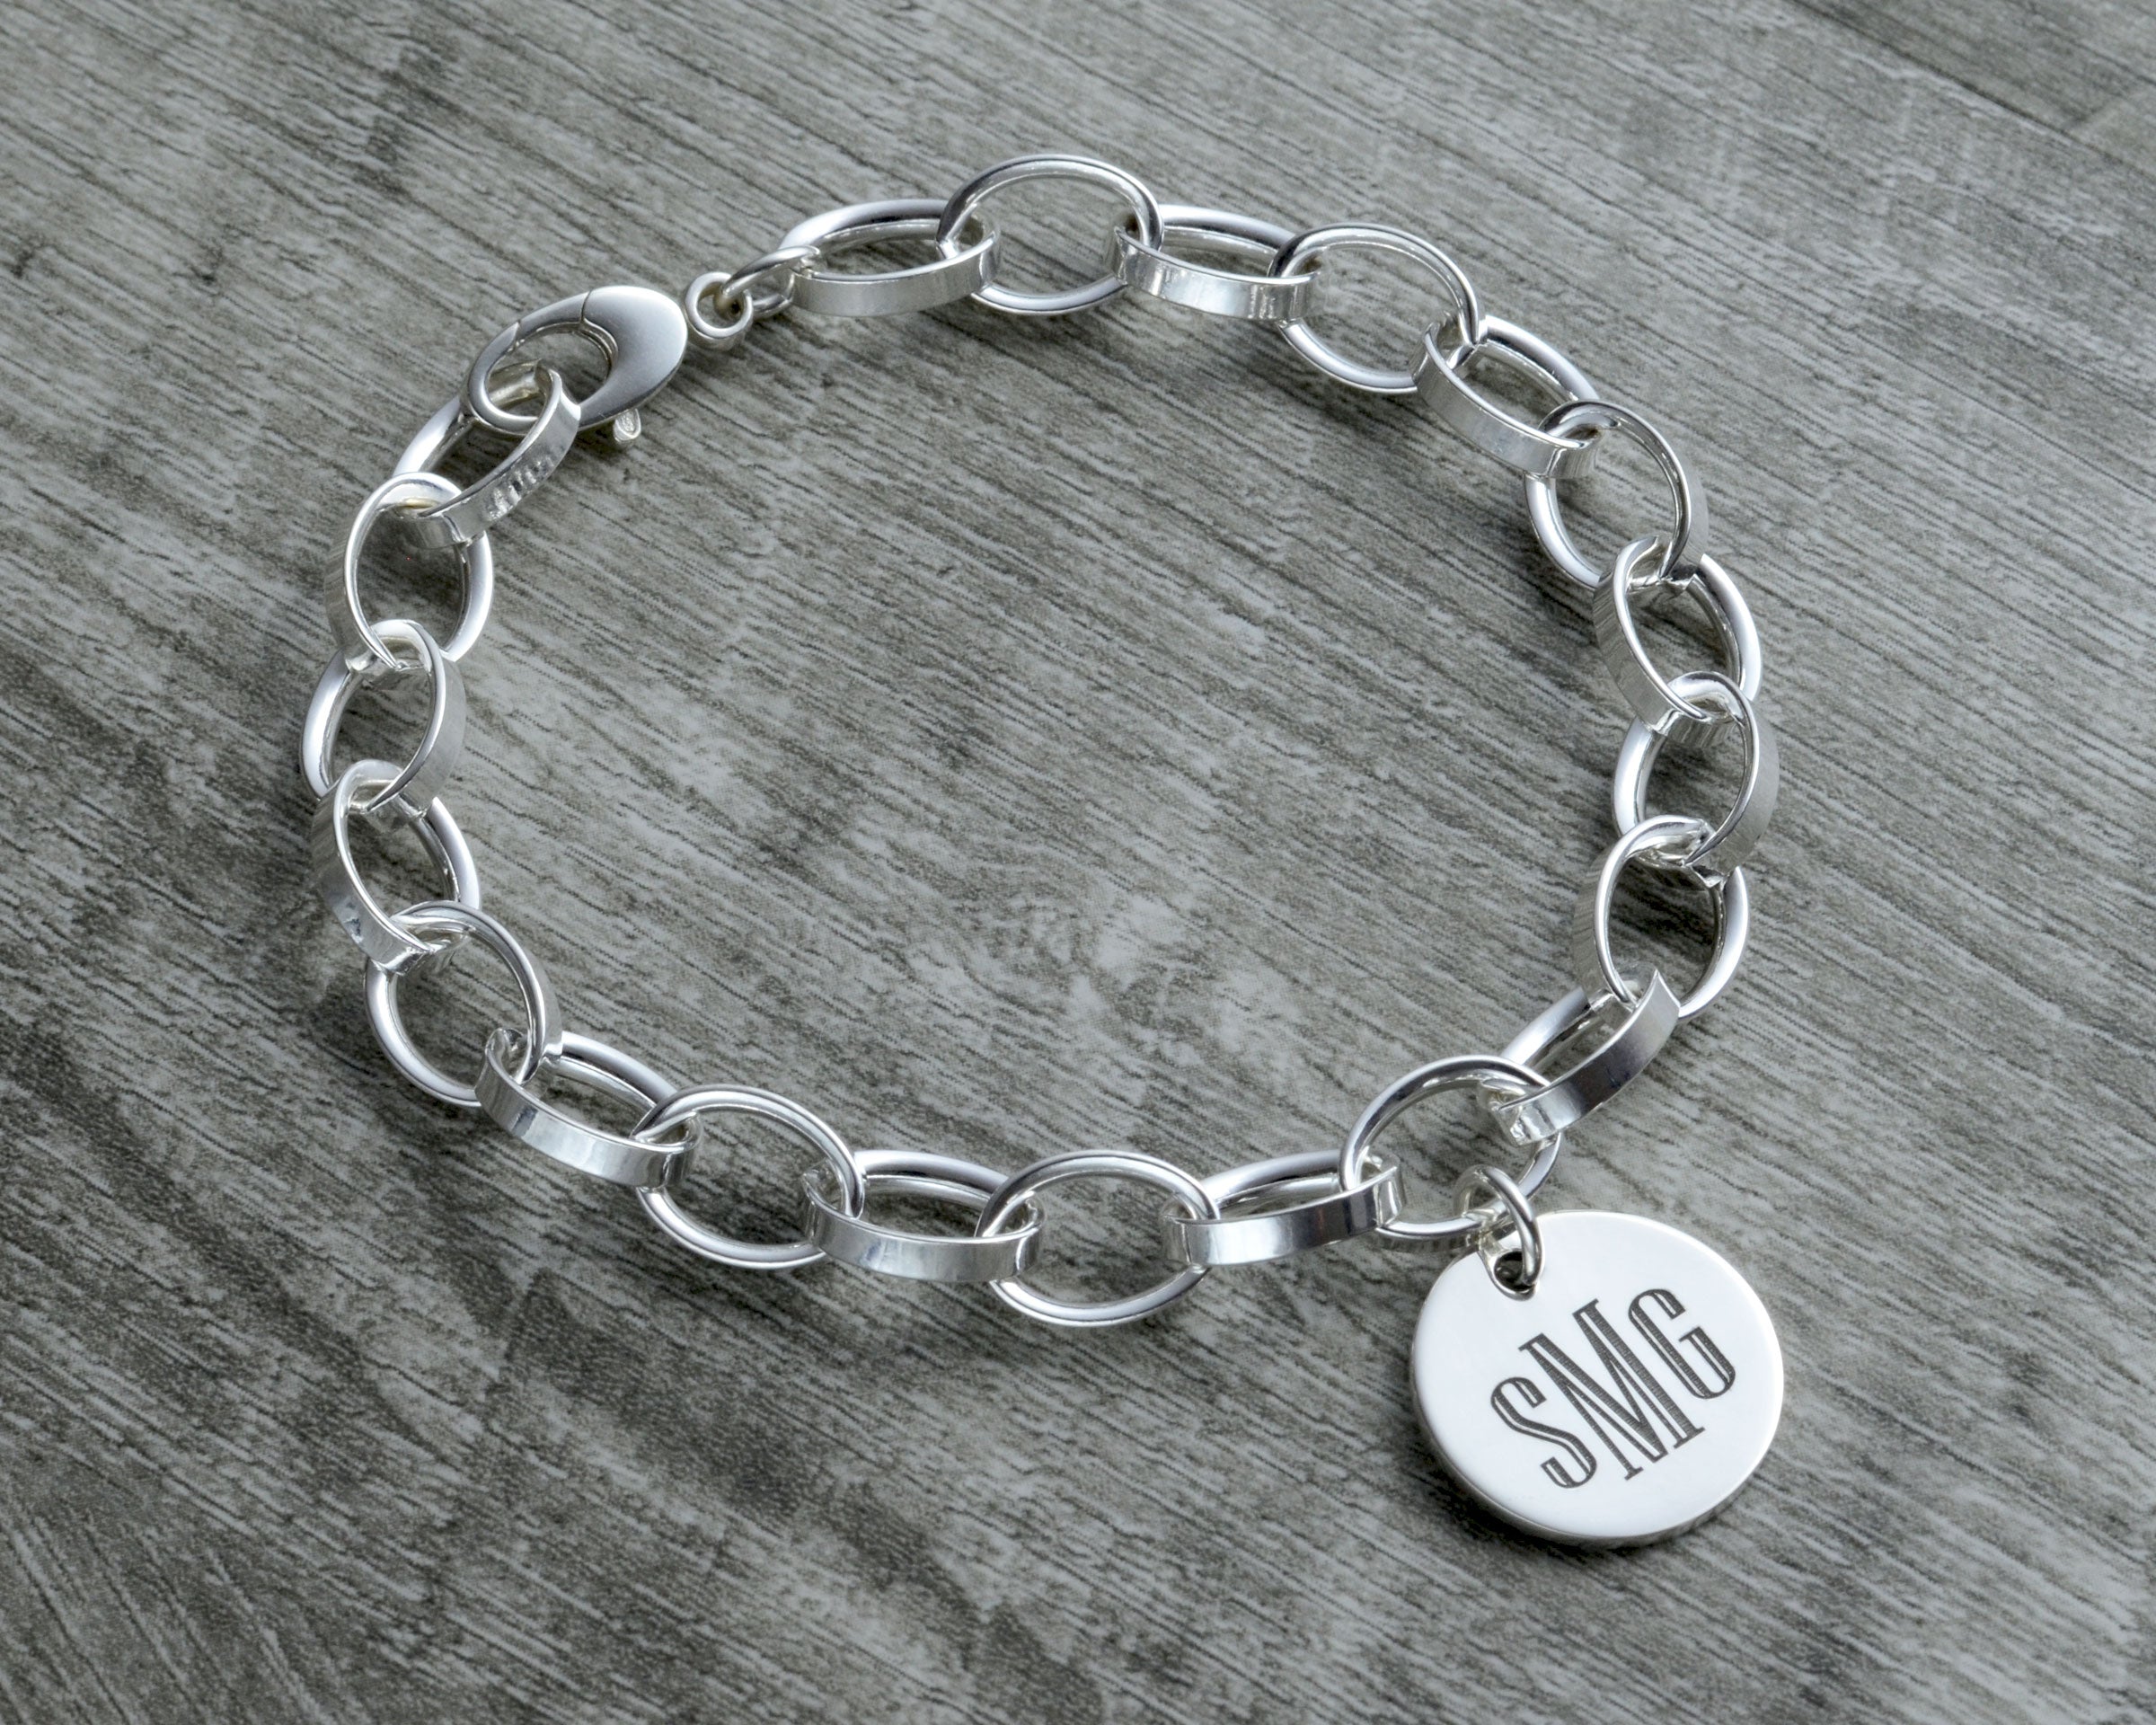 Classic Sterling Silver Charm Bracelet | Wellesley Row 7.1